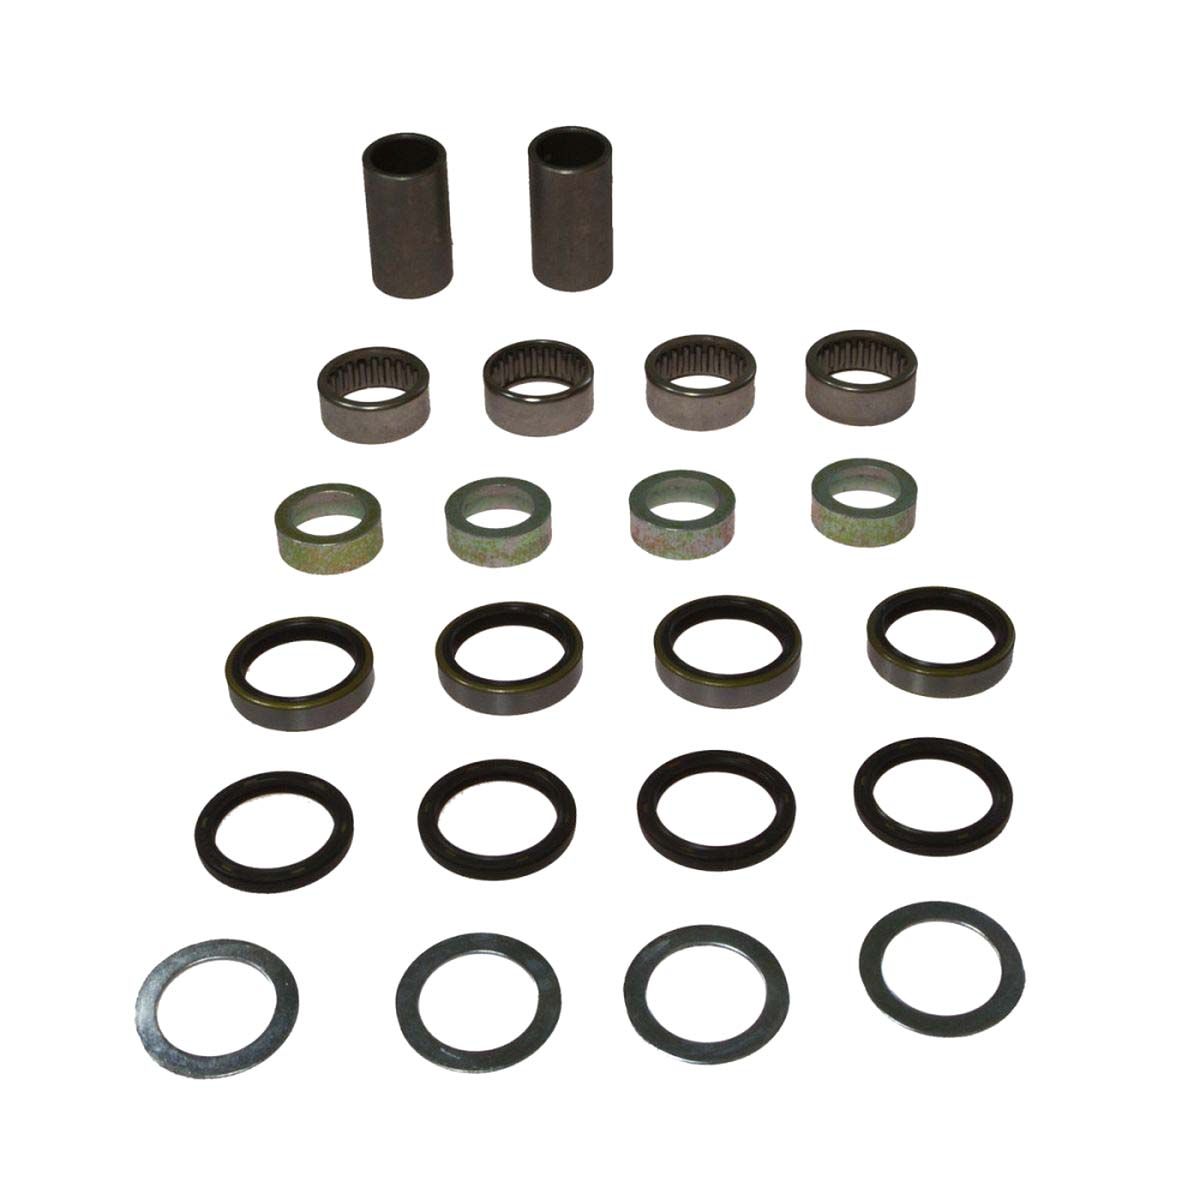 KIT CUSCINETTI FORCELLONE KTM 525 EXC 2006 ALL BALLS 28-1125 